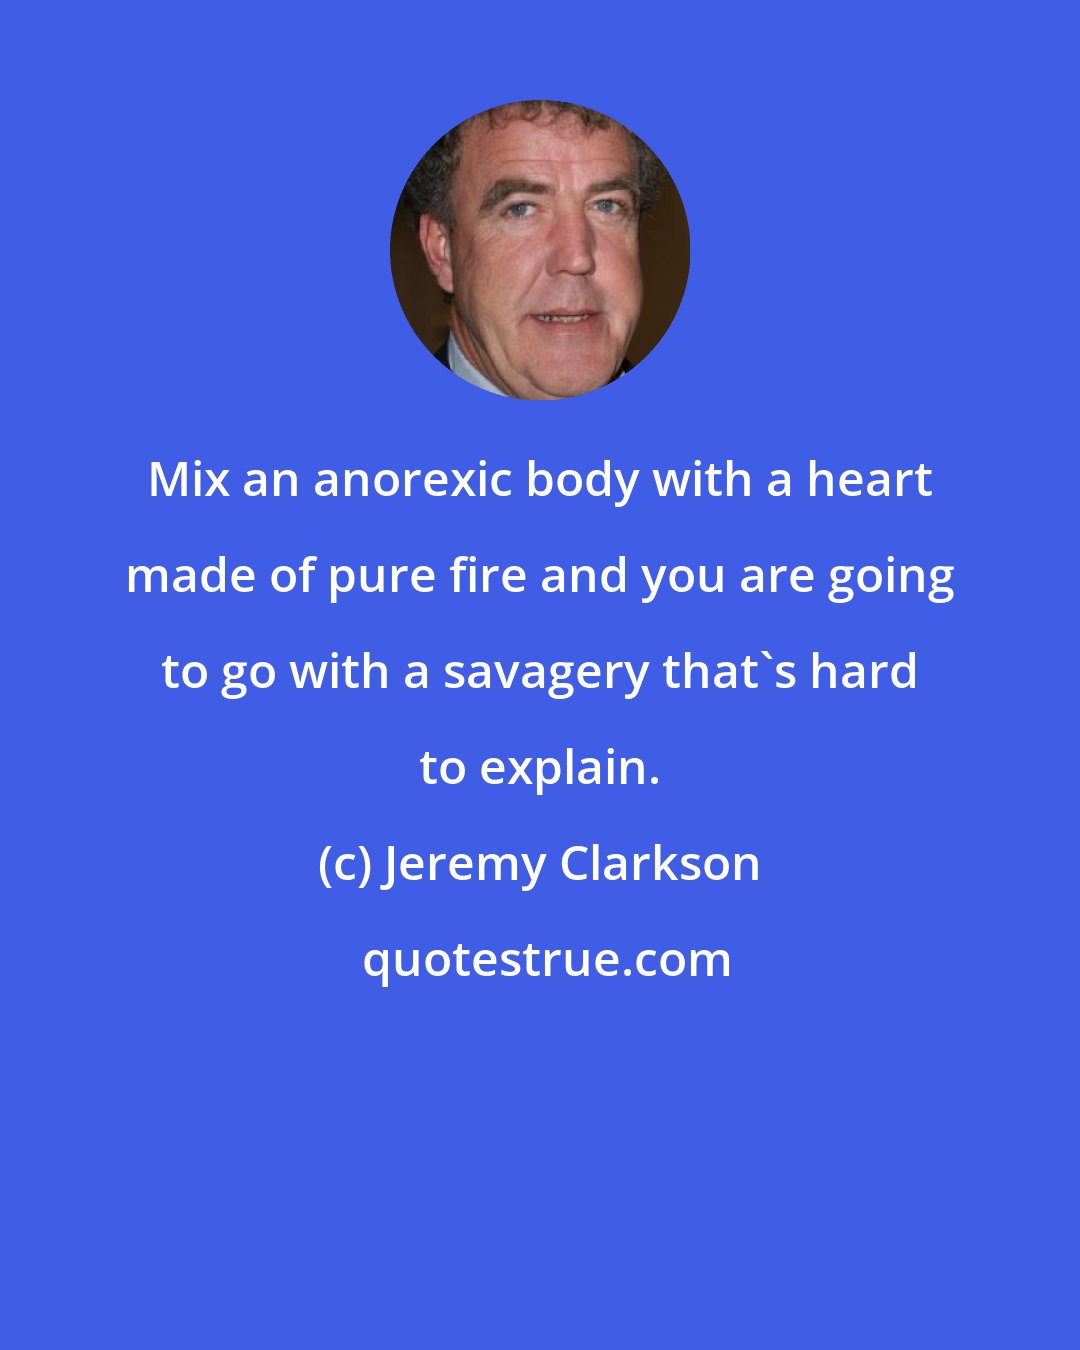 Jeremy Clarkson: Mix an anorexic body with a heart made of pure fire and you are going to go with a savagery that's hard to explain.